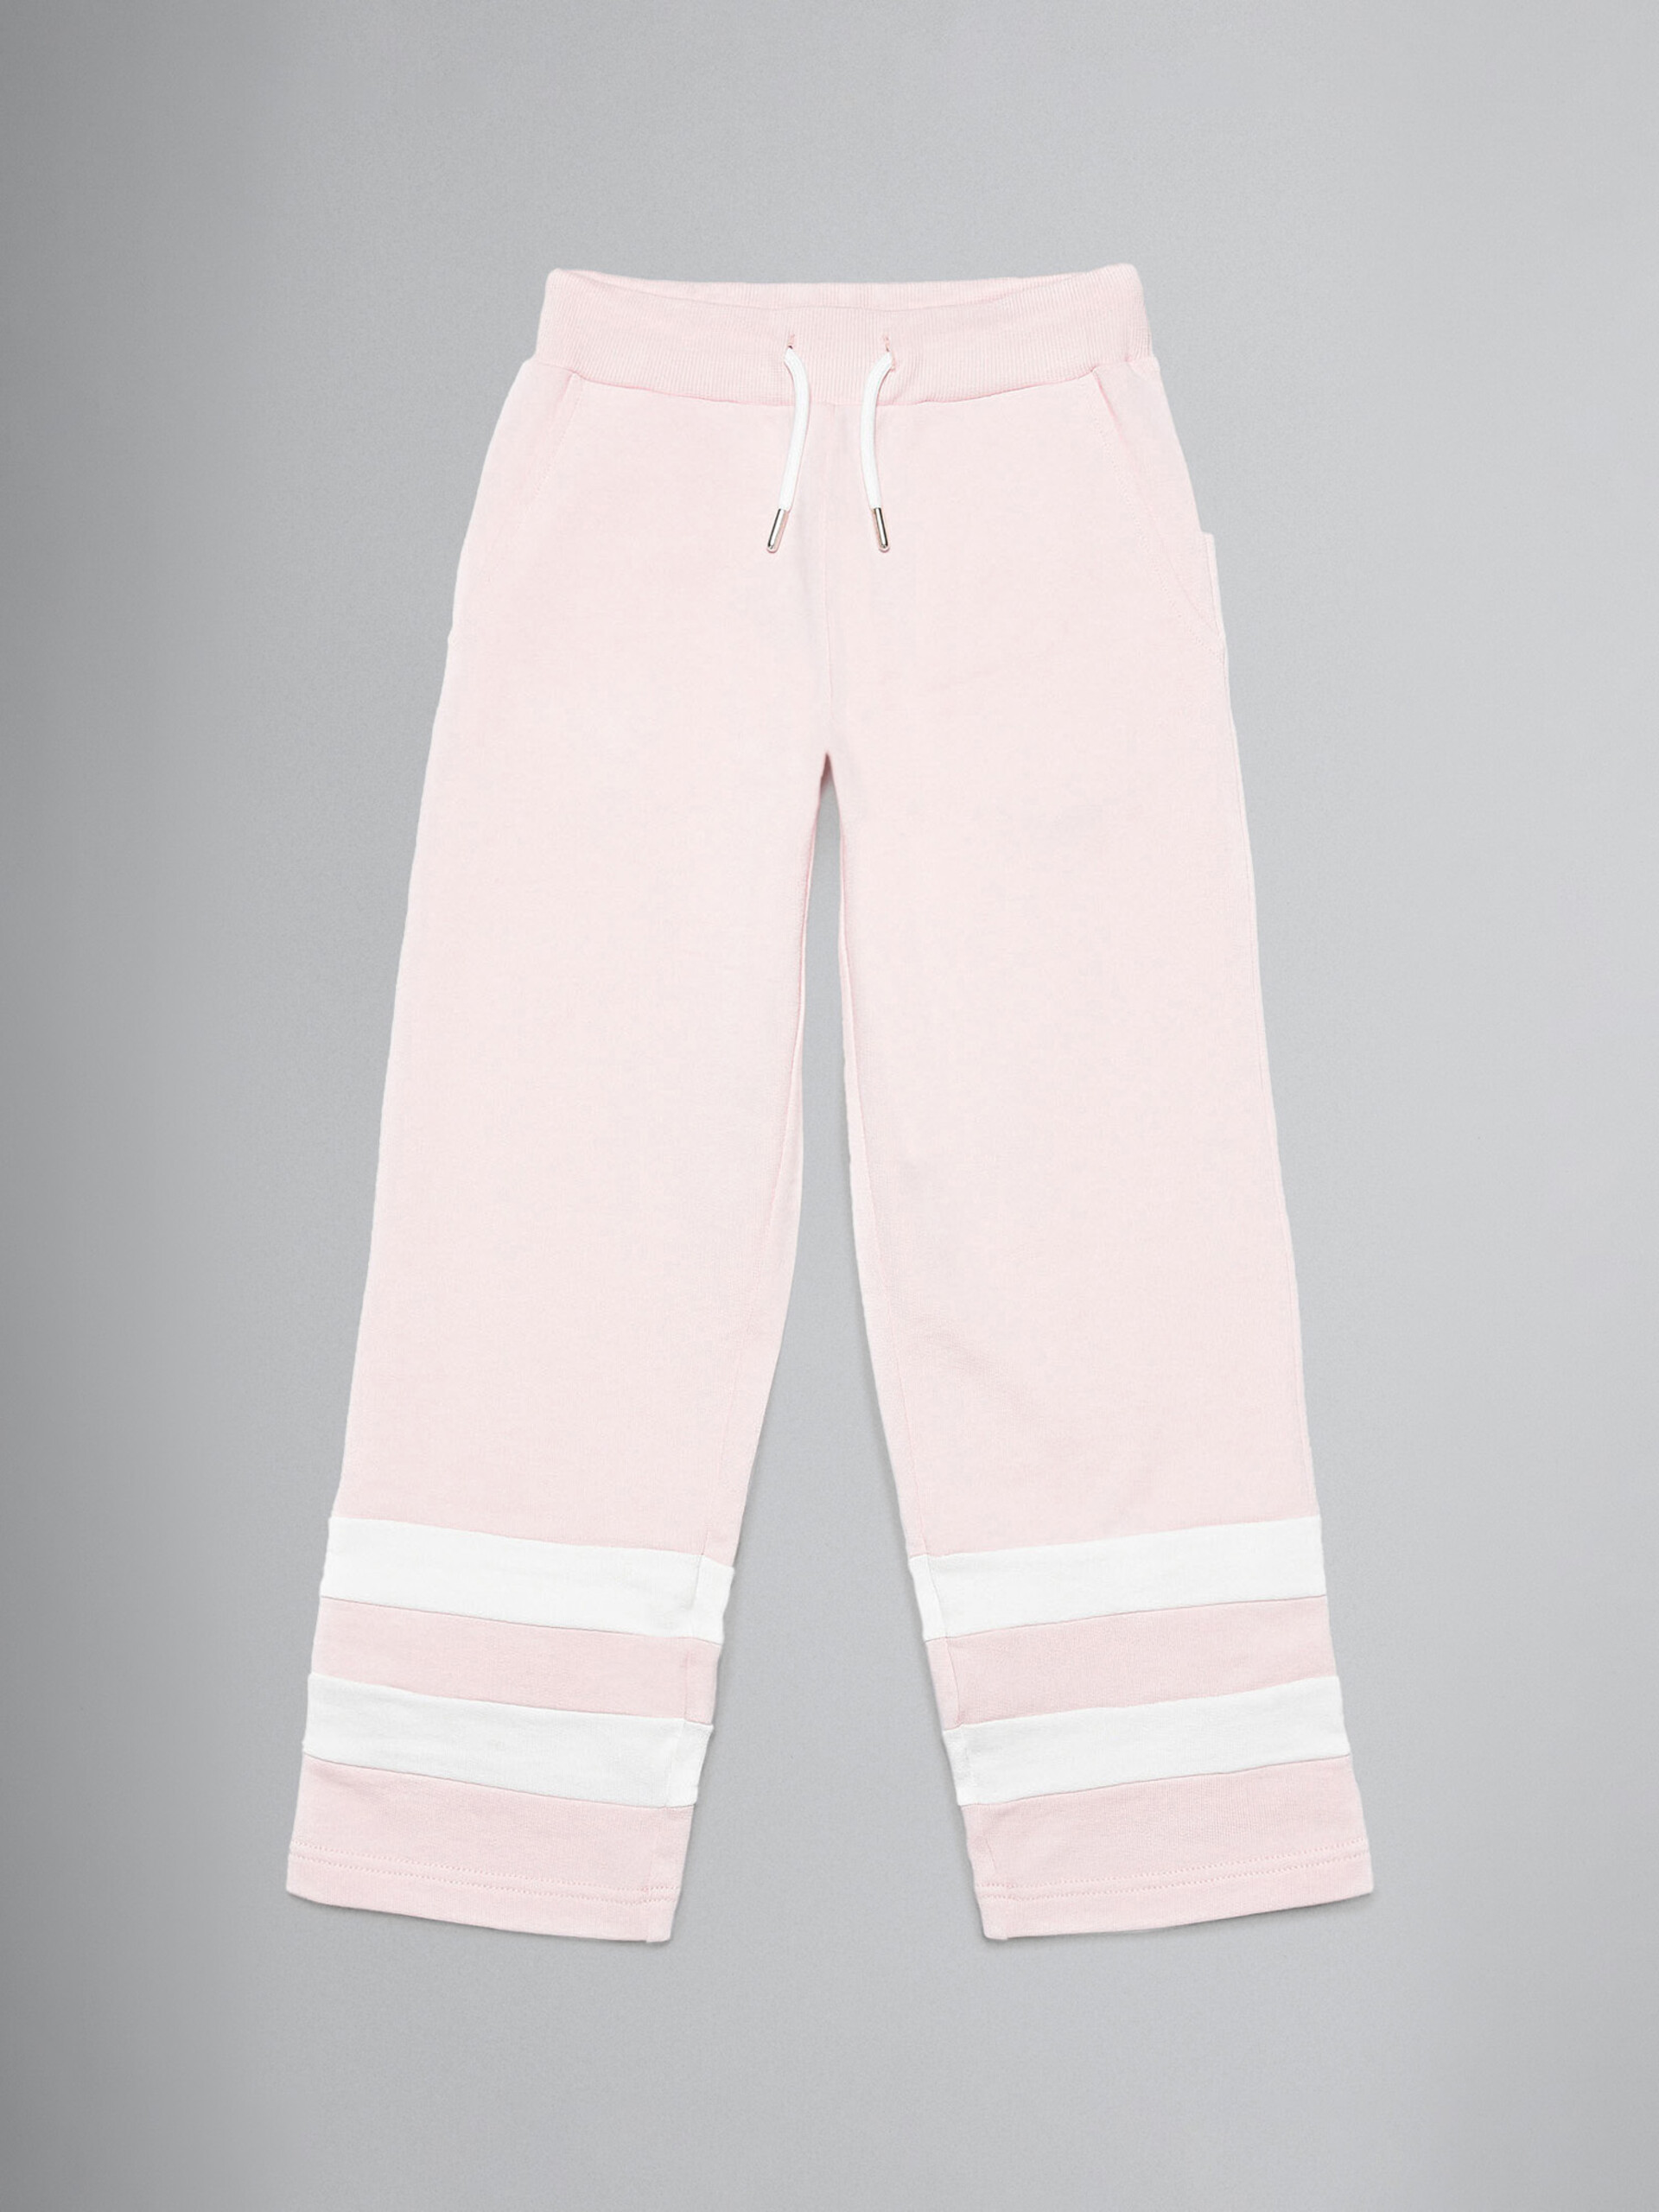 Ballet pink college track pants with contrast bands - Pants - Image 1